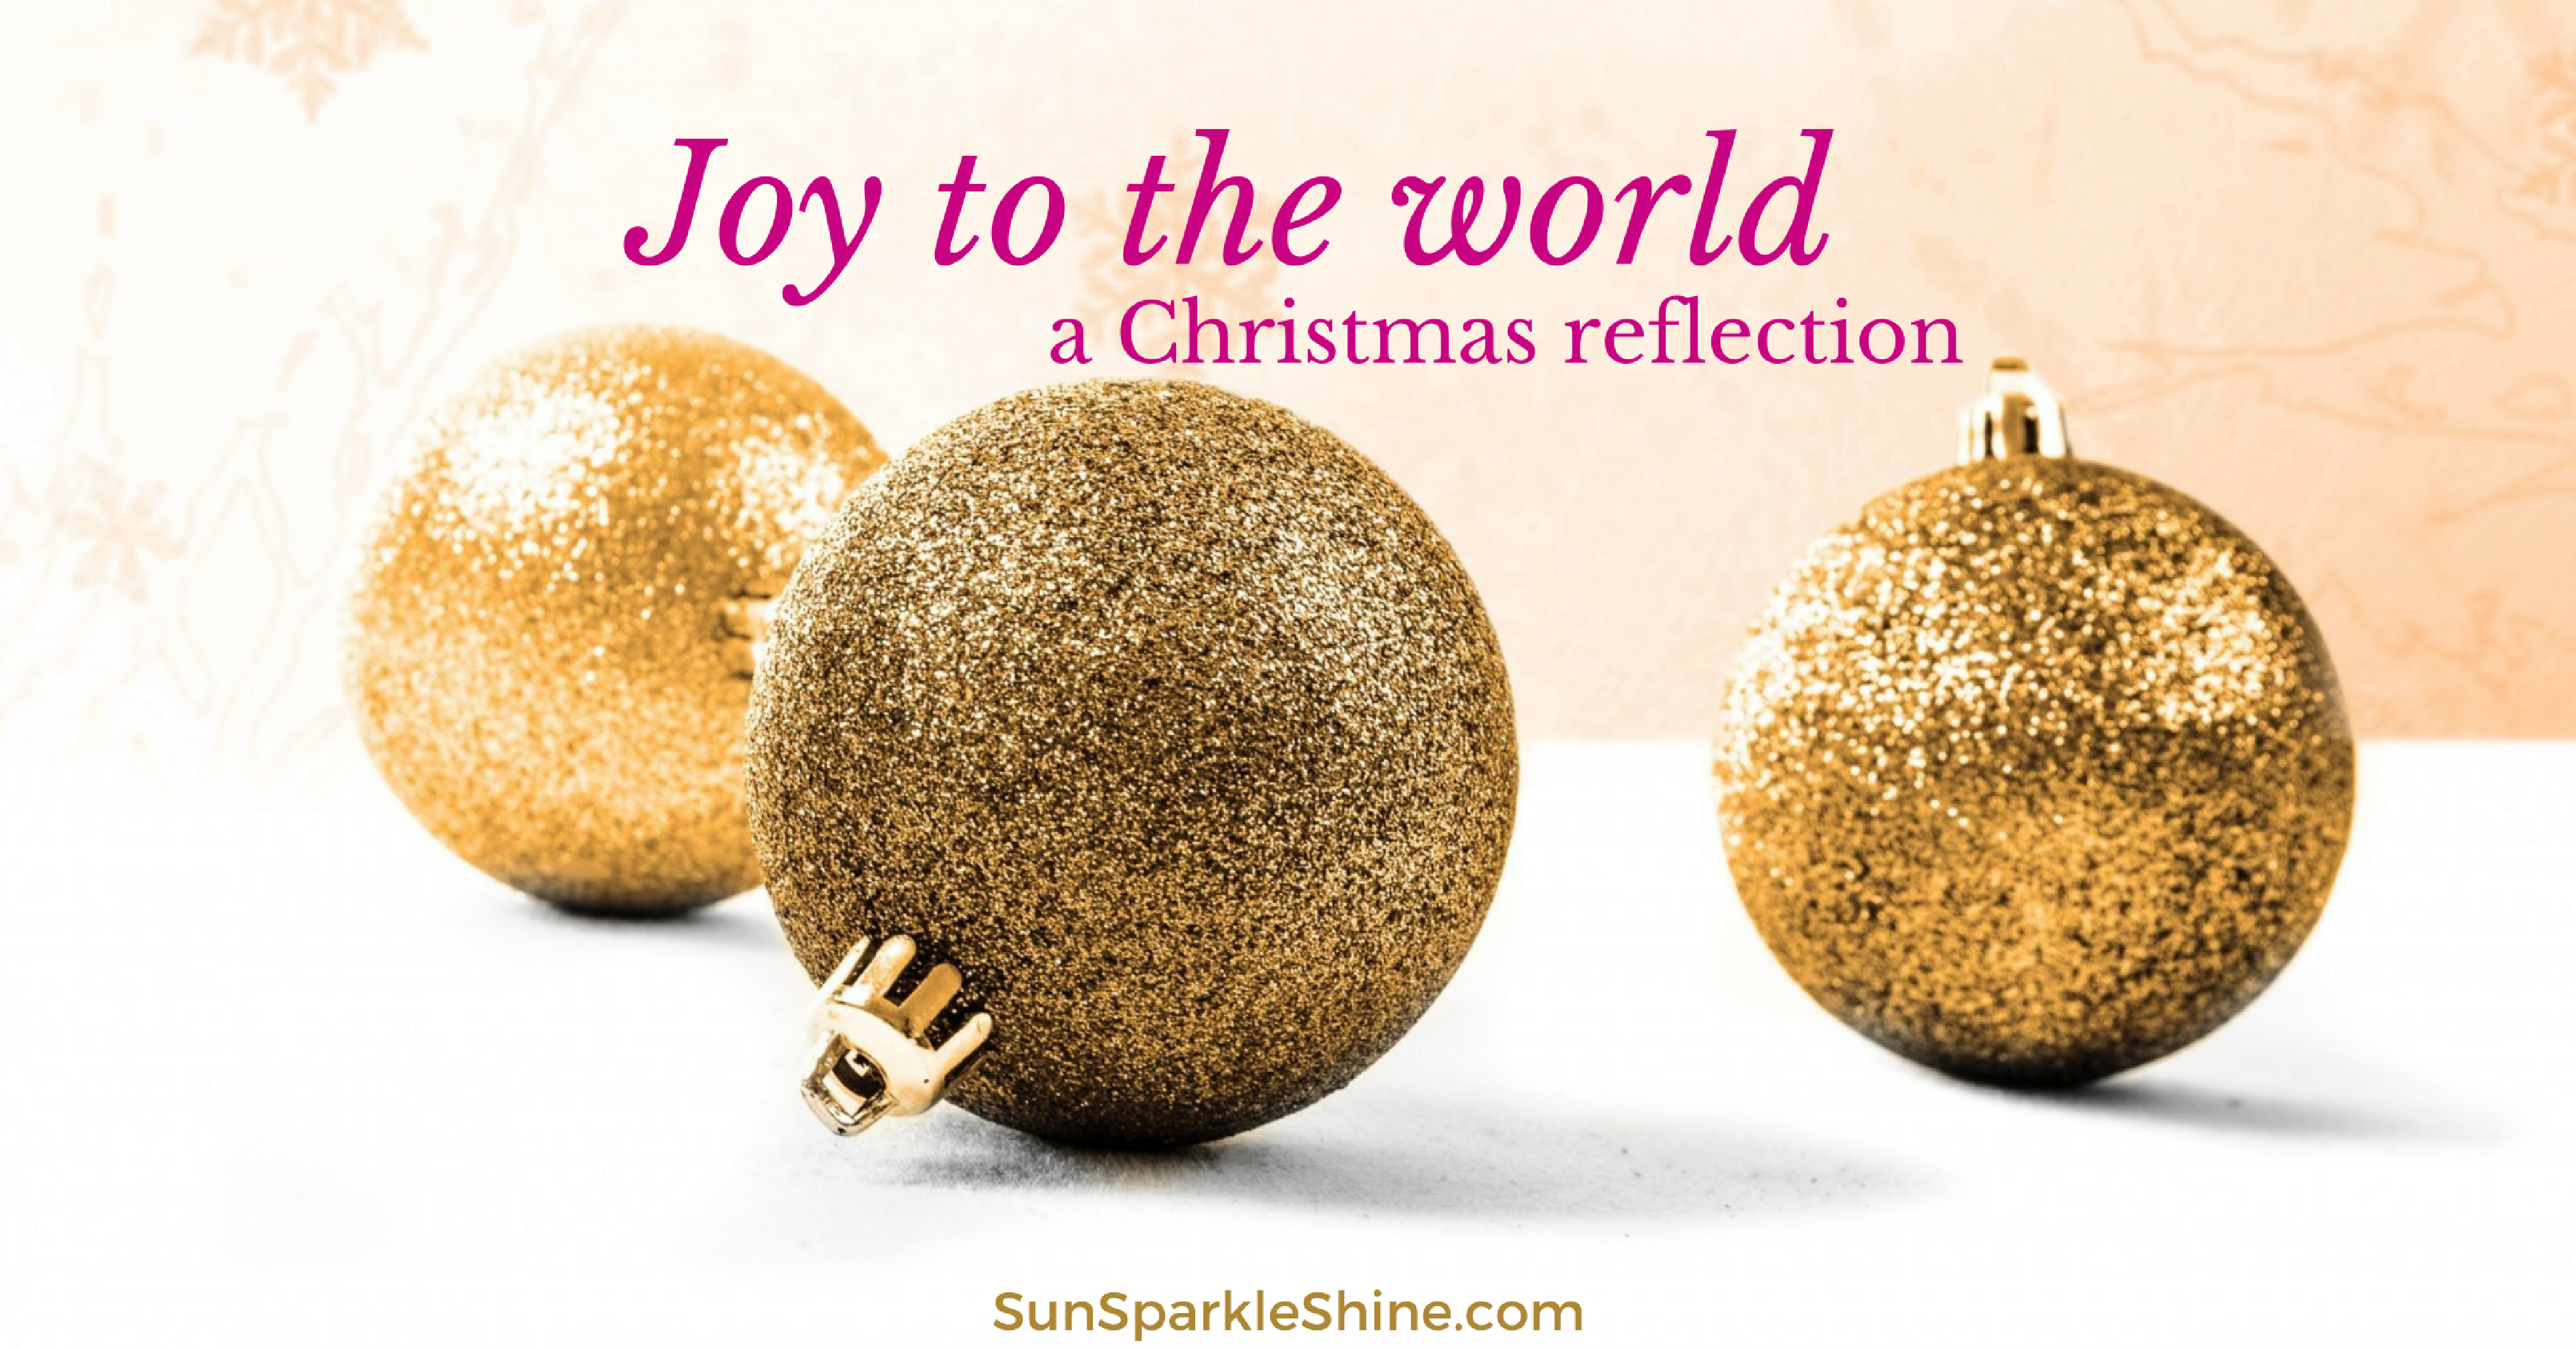 Joy to the World is not just another favourite Christmas song but a call to fill our lives with the things that really last. Will you fill up or will you be fulfilled? You get to choose. Find out how.